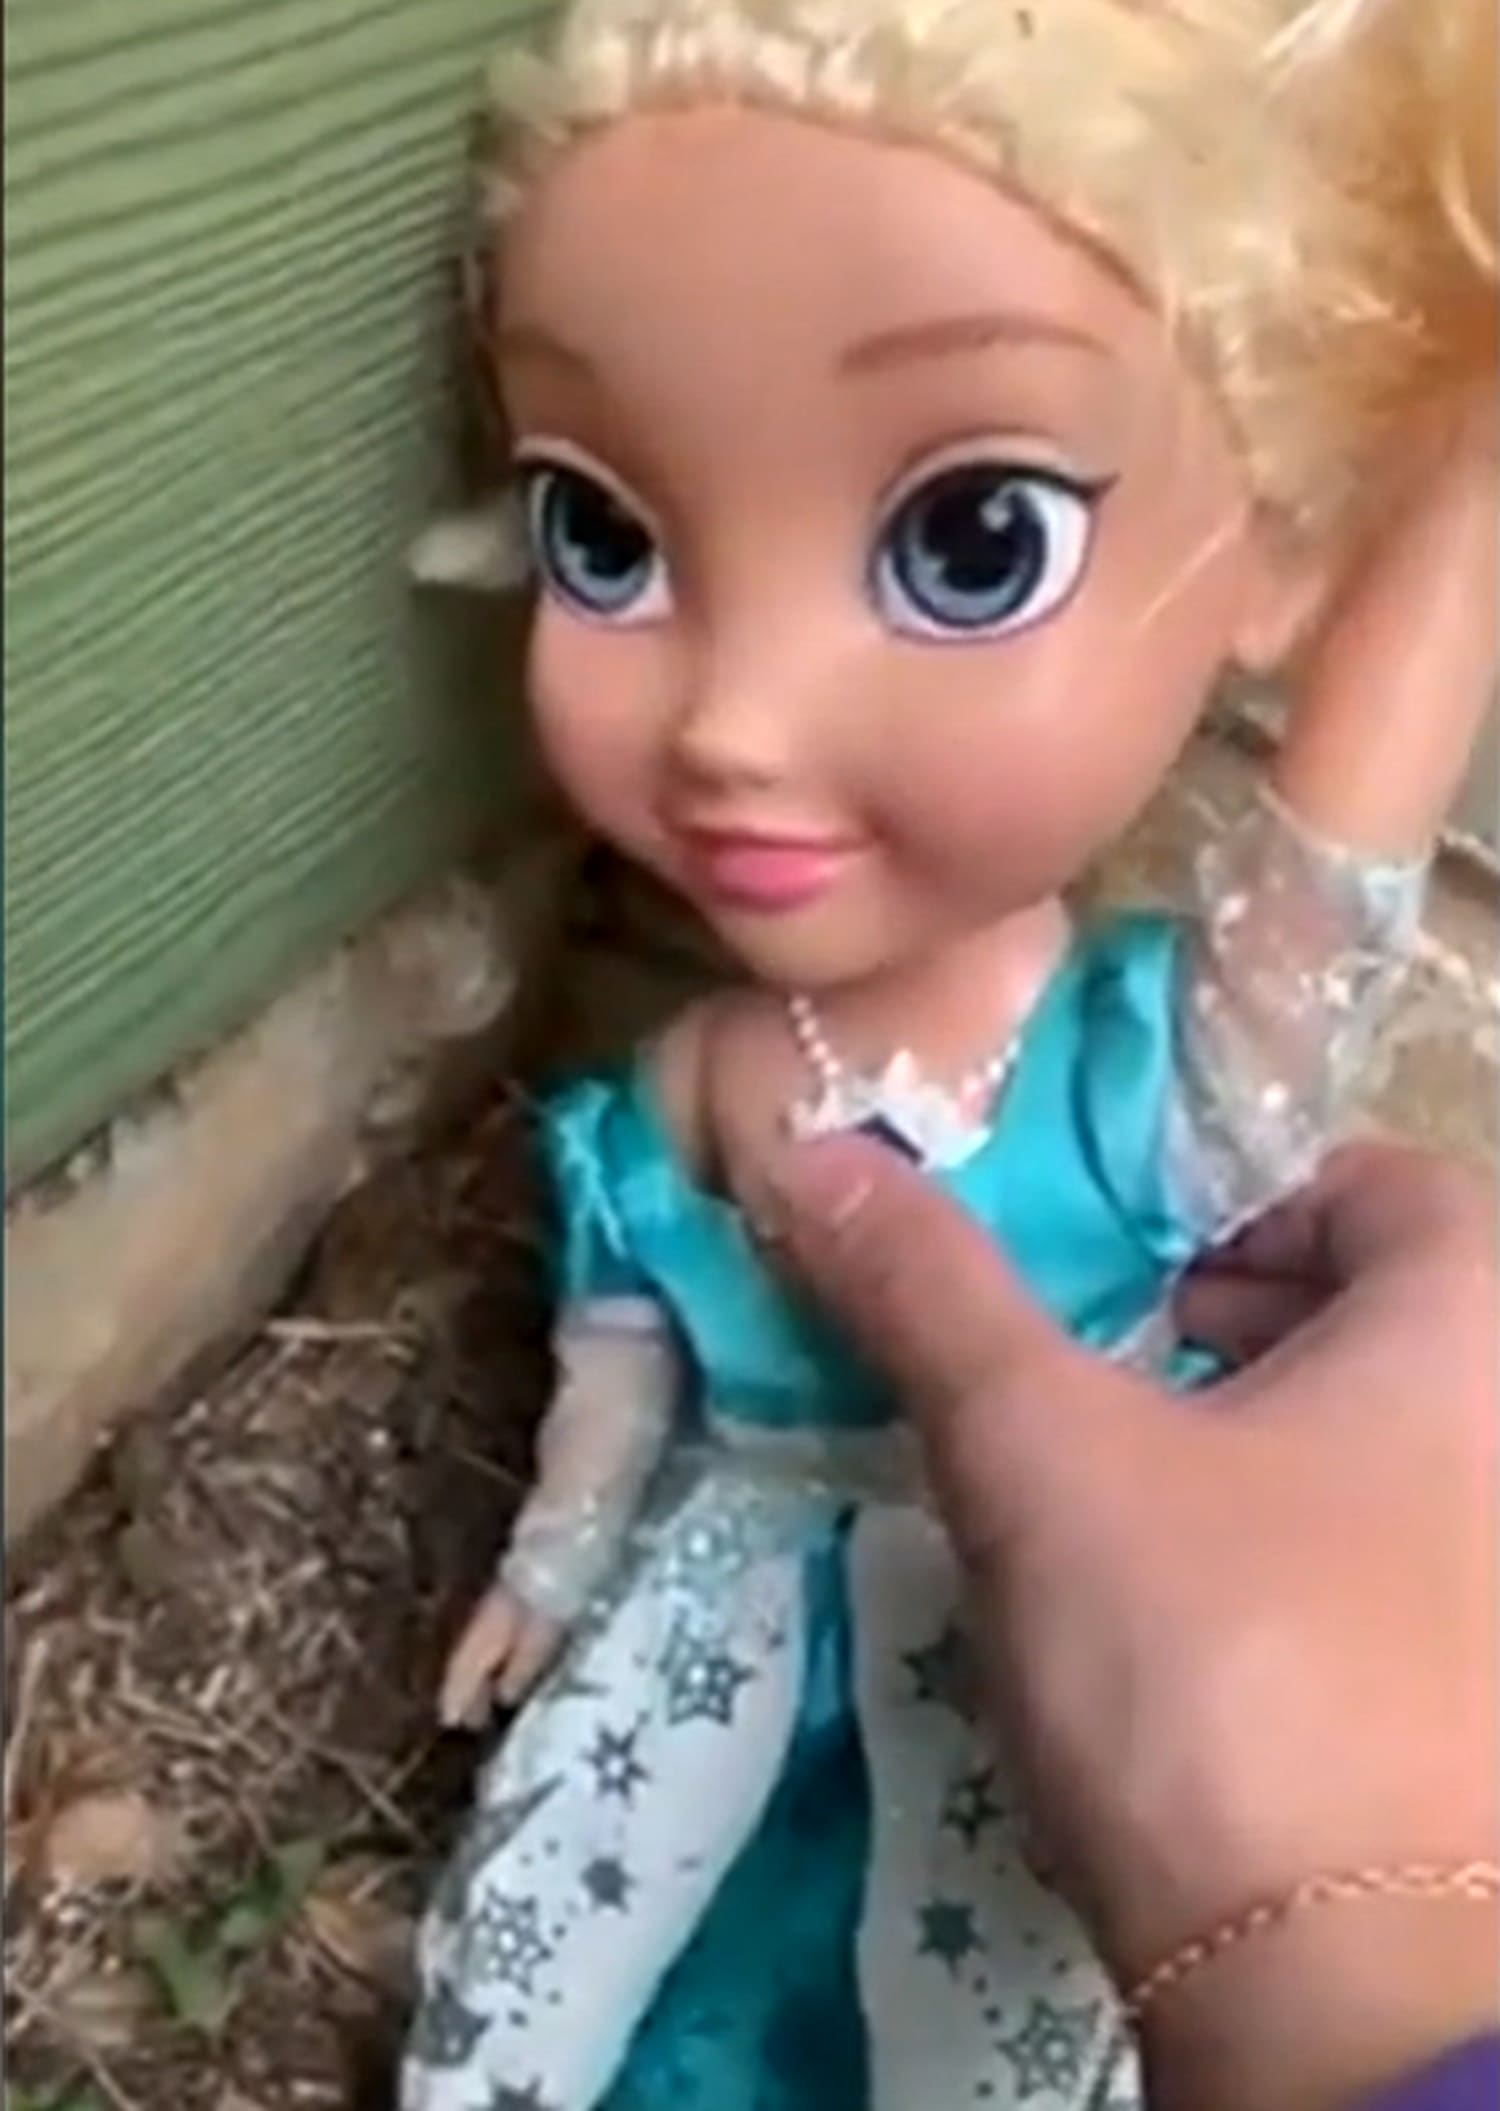 where to buy haunted dolls